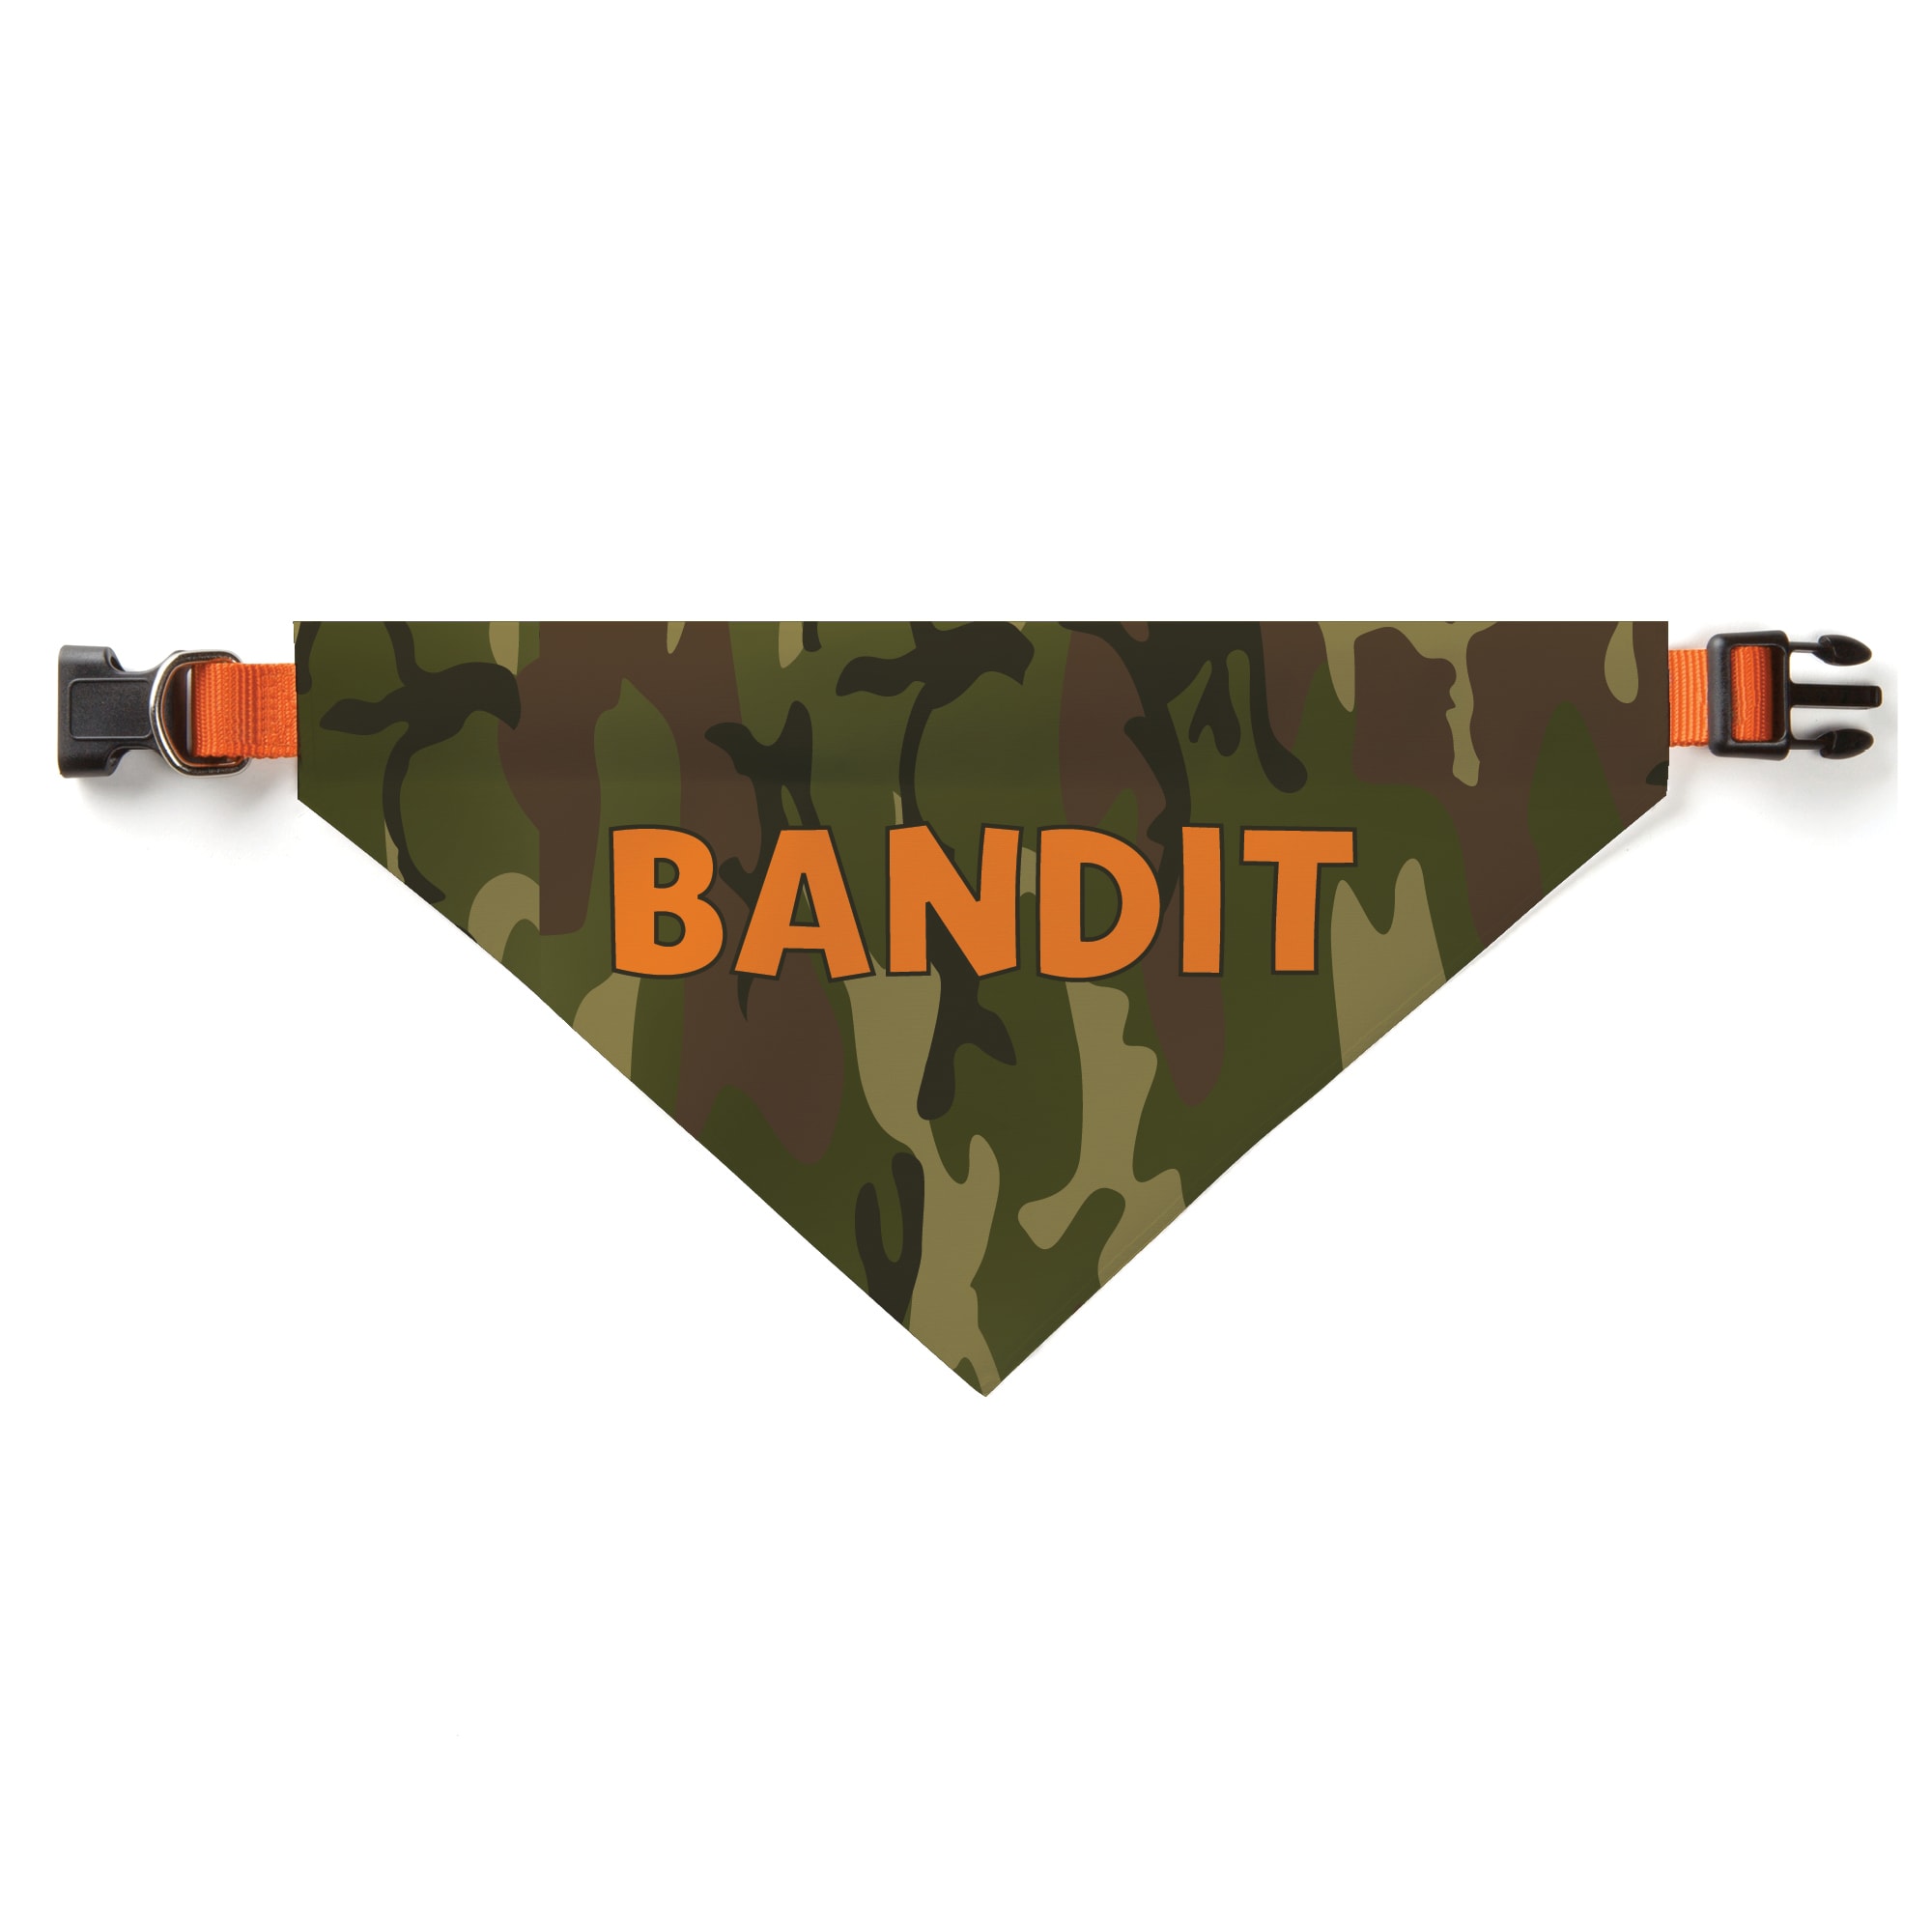 Medium Large Slide On Collar Style BA2 6 x Blank Dog BANDANAS Camo Army Cotton For Personalising Crafts Printing Embroidery Vinyl Small